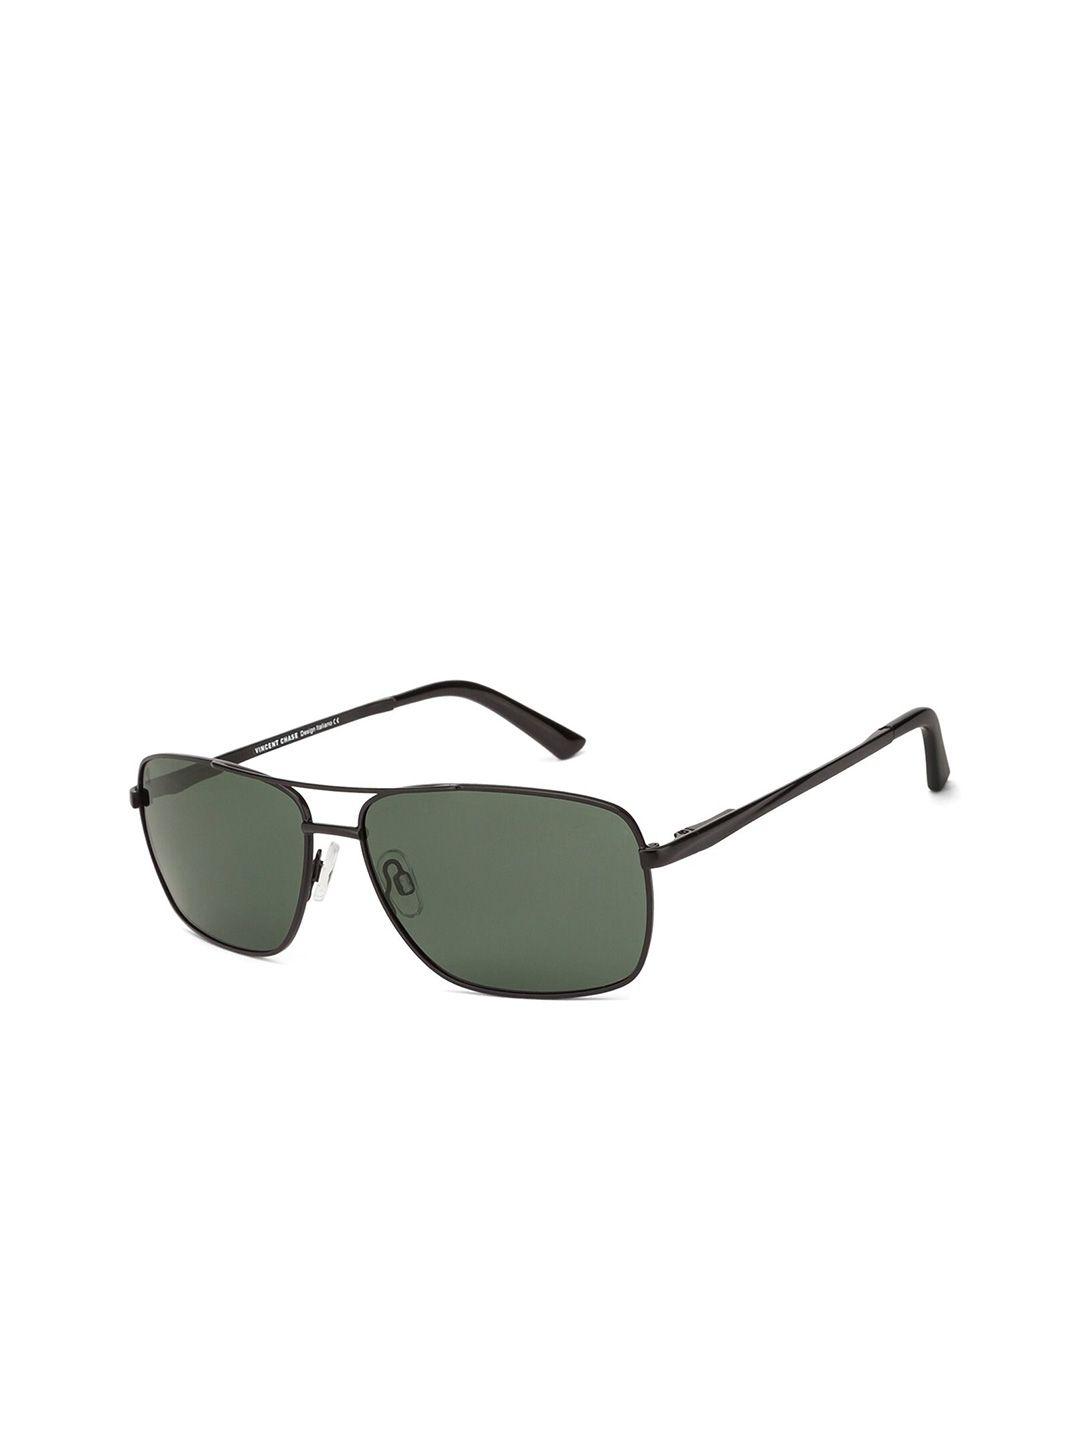 vincent chase unisex green lens & black rectangle sunglasses with polarised lens